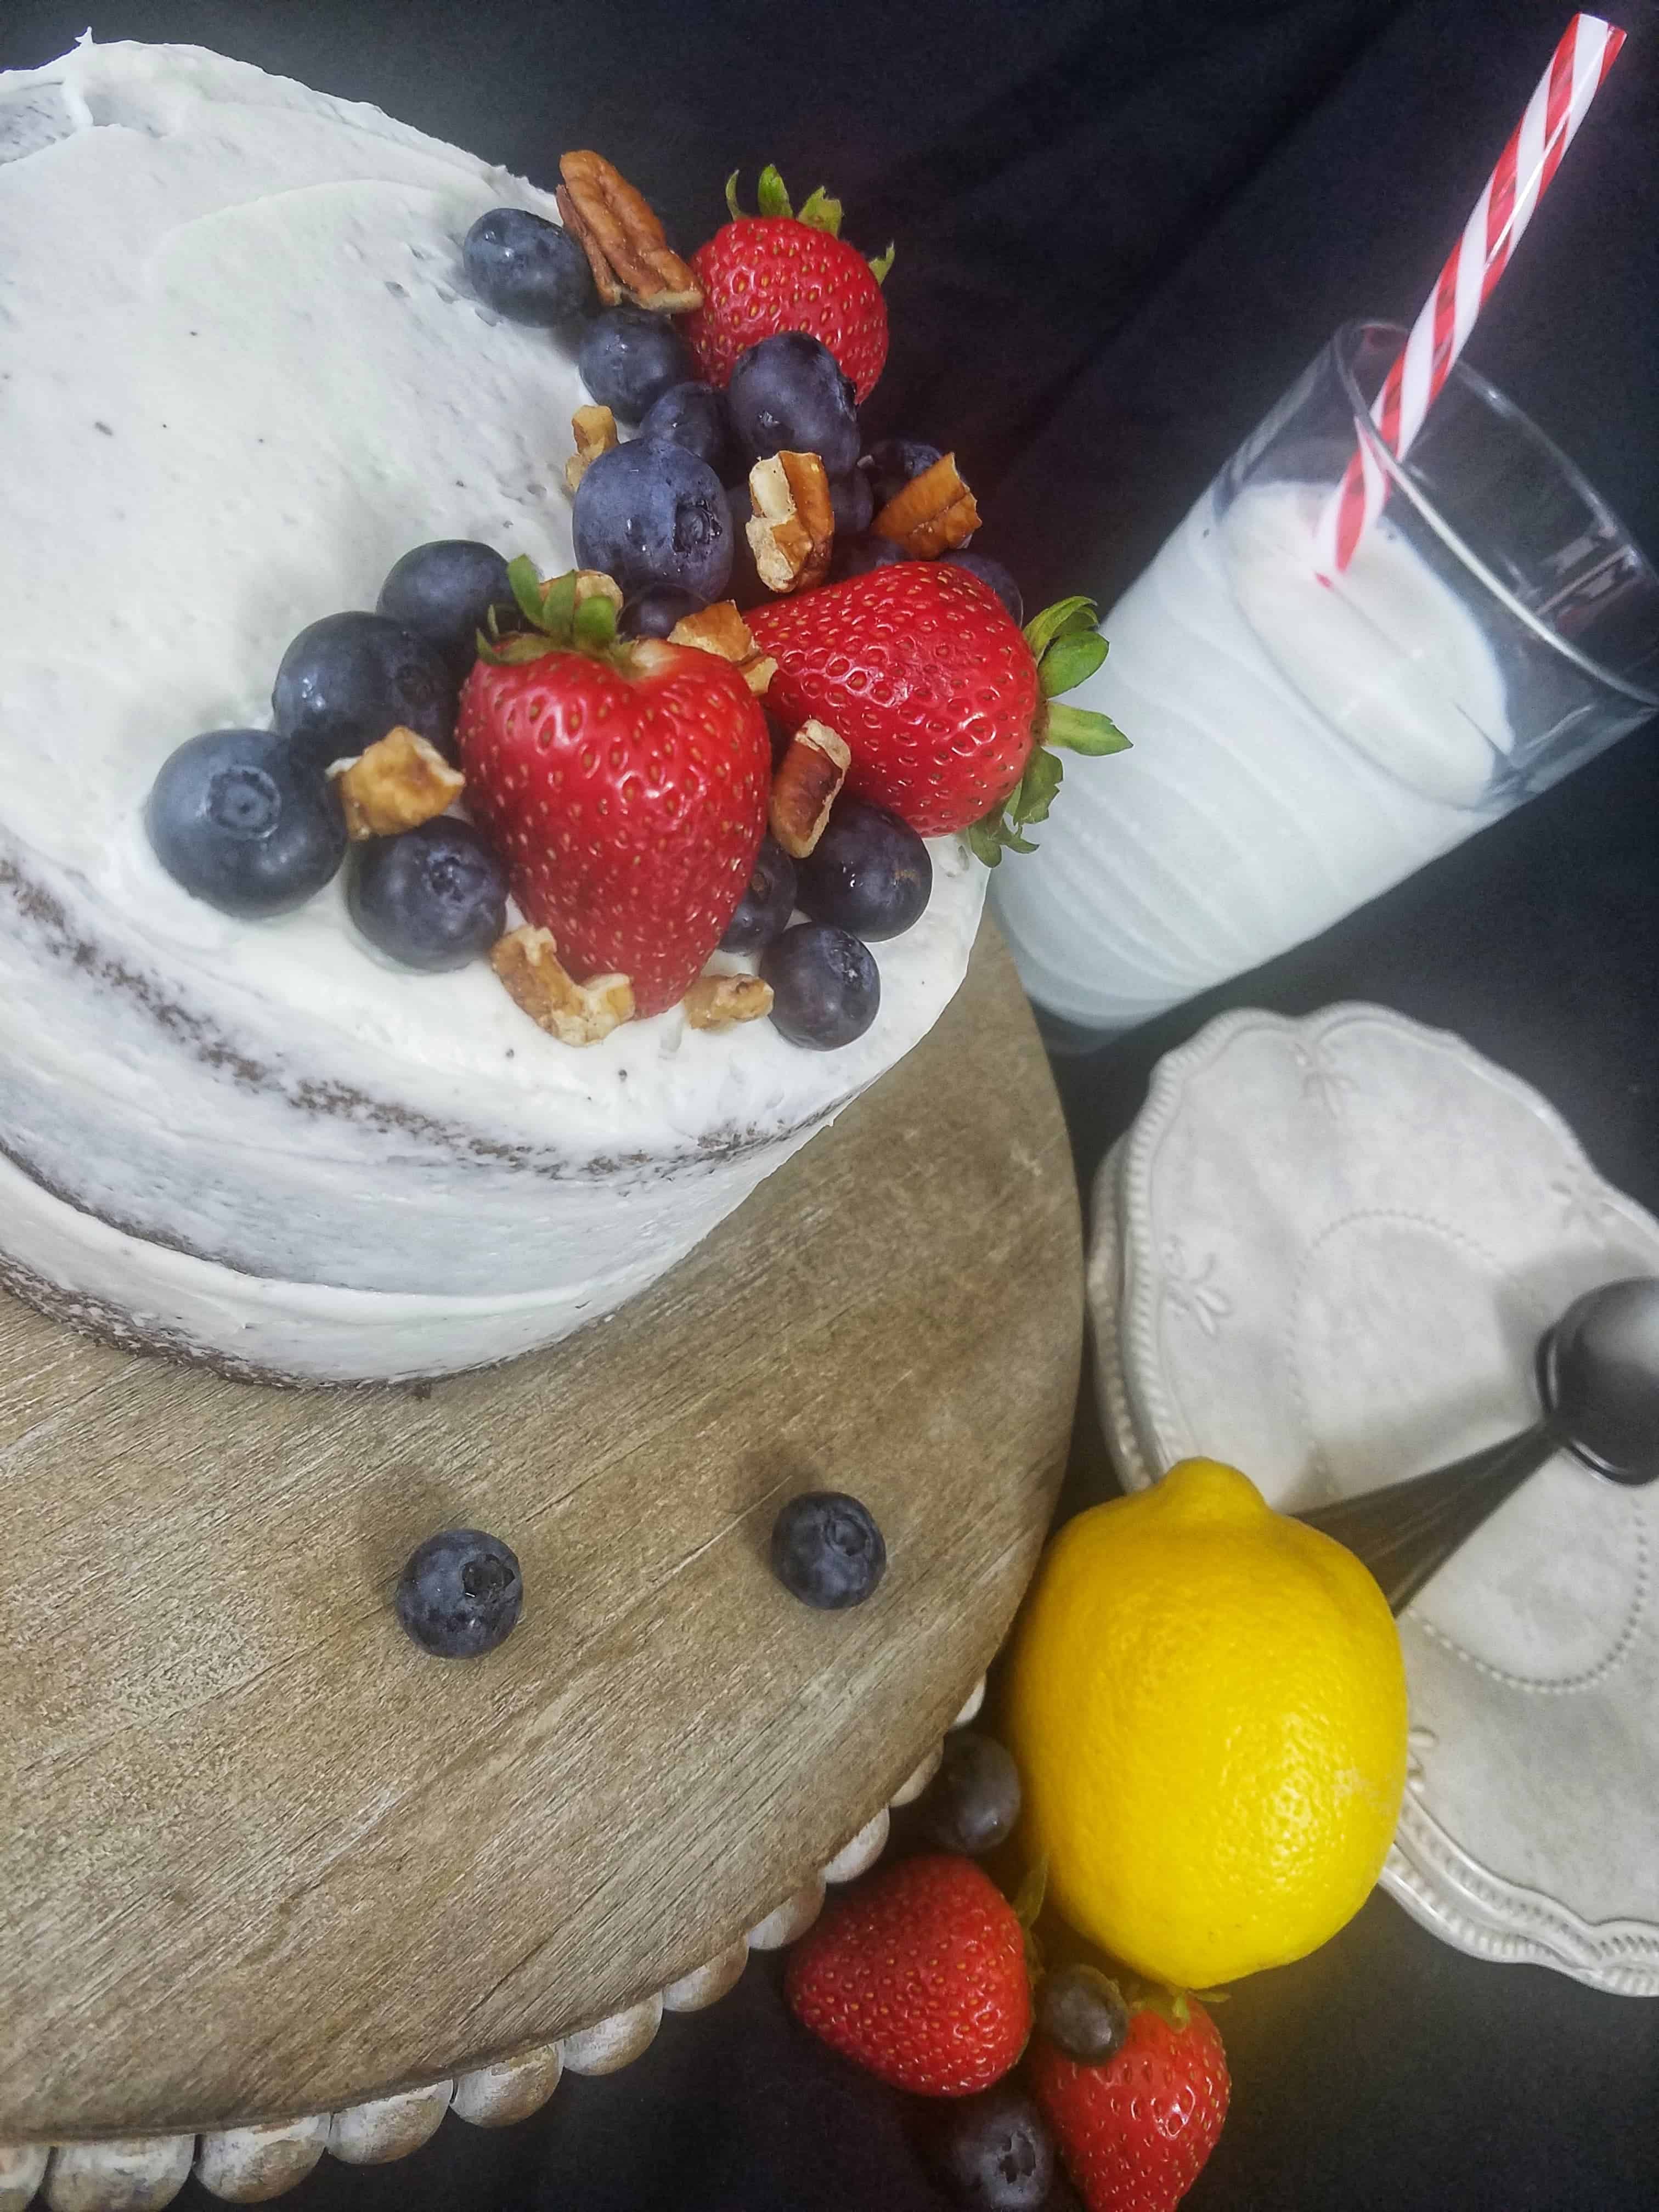 Gluten Free Chocolate cake topped with strawberries and blueberries glass of milk in background